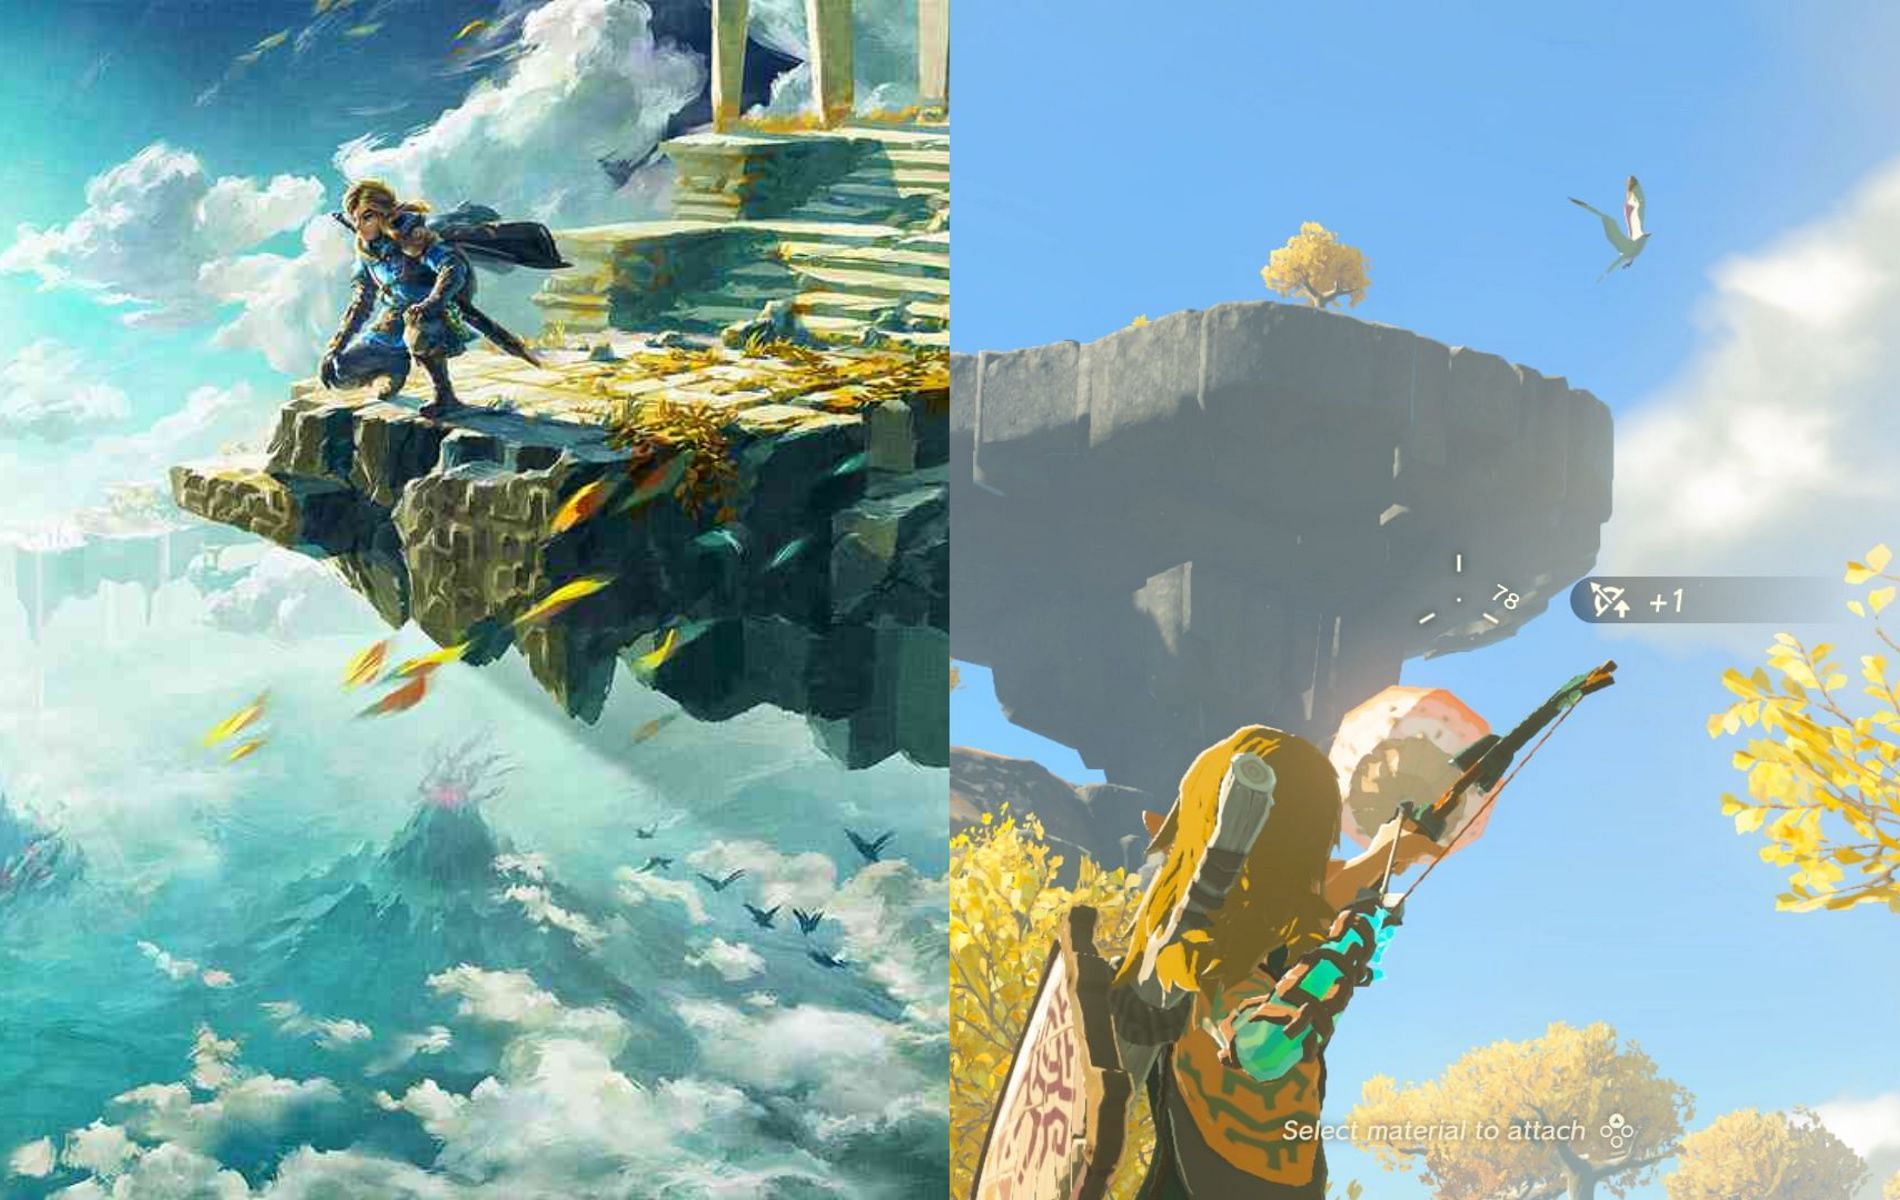 The Fuse mechanic makes for some interest arrow creations in The Legend of Zelda Tears of the Kingdom (Images via Nintendo)